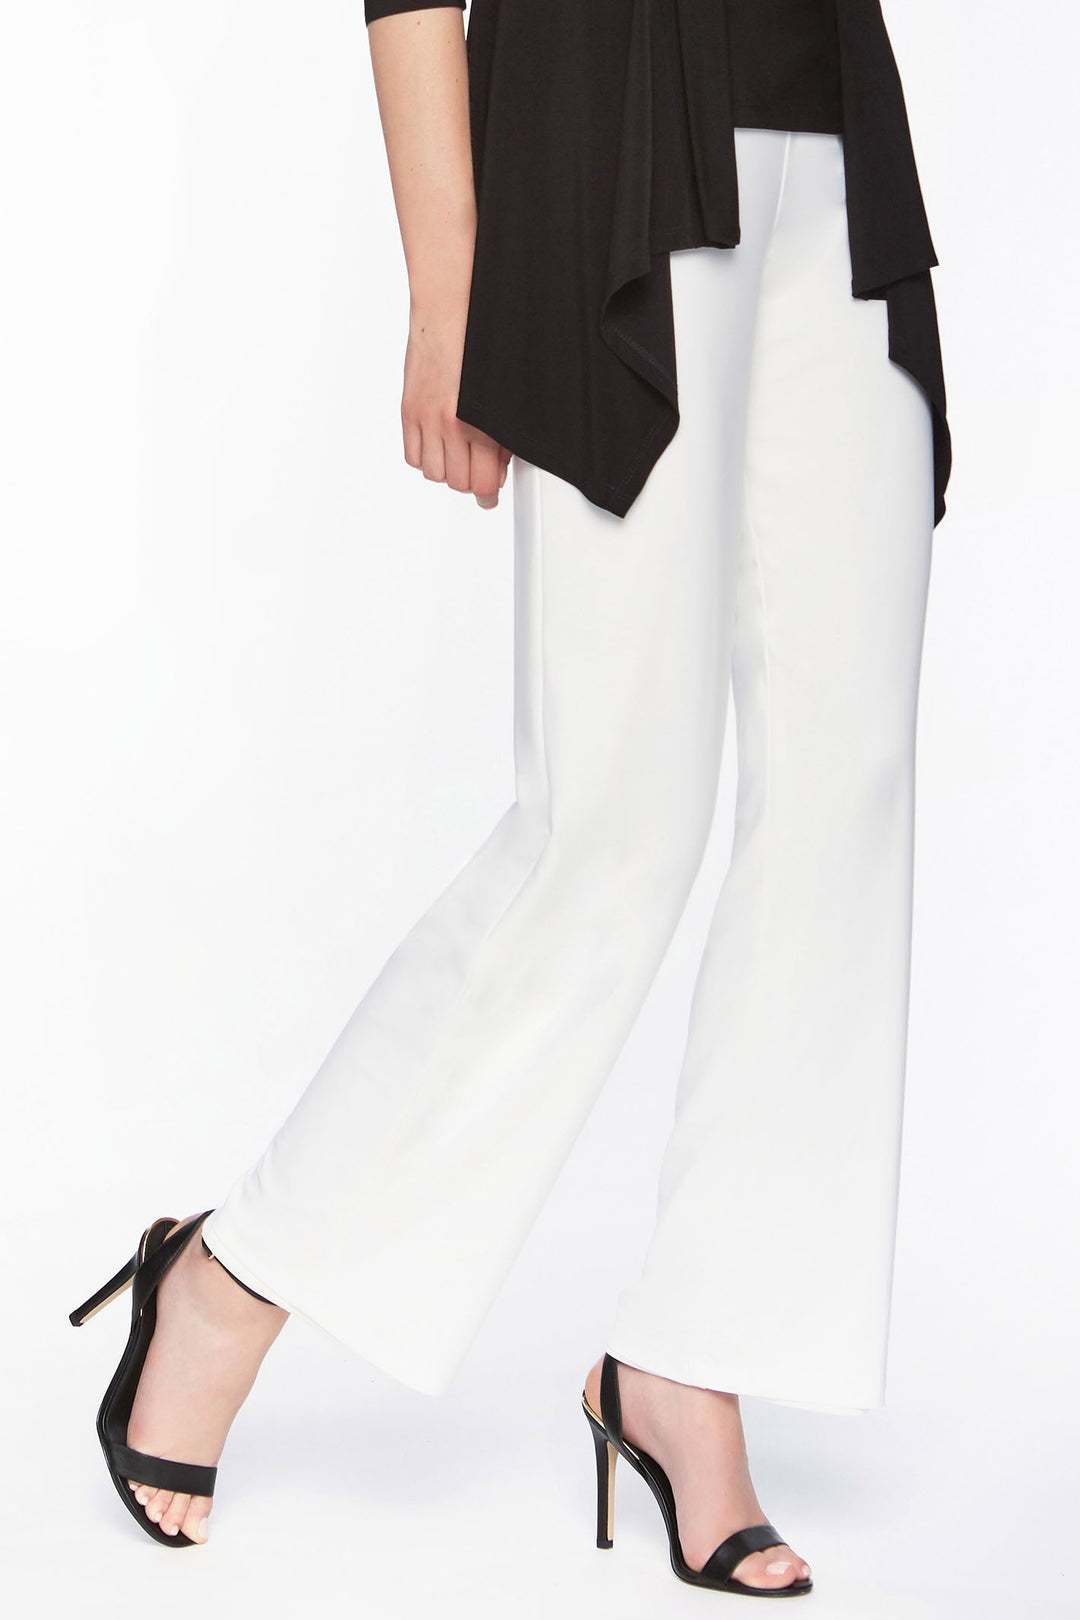 Frank Lyman 038 White Jersey Pull-On Trousers - Dotique